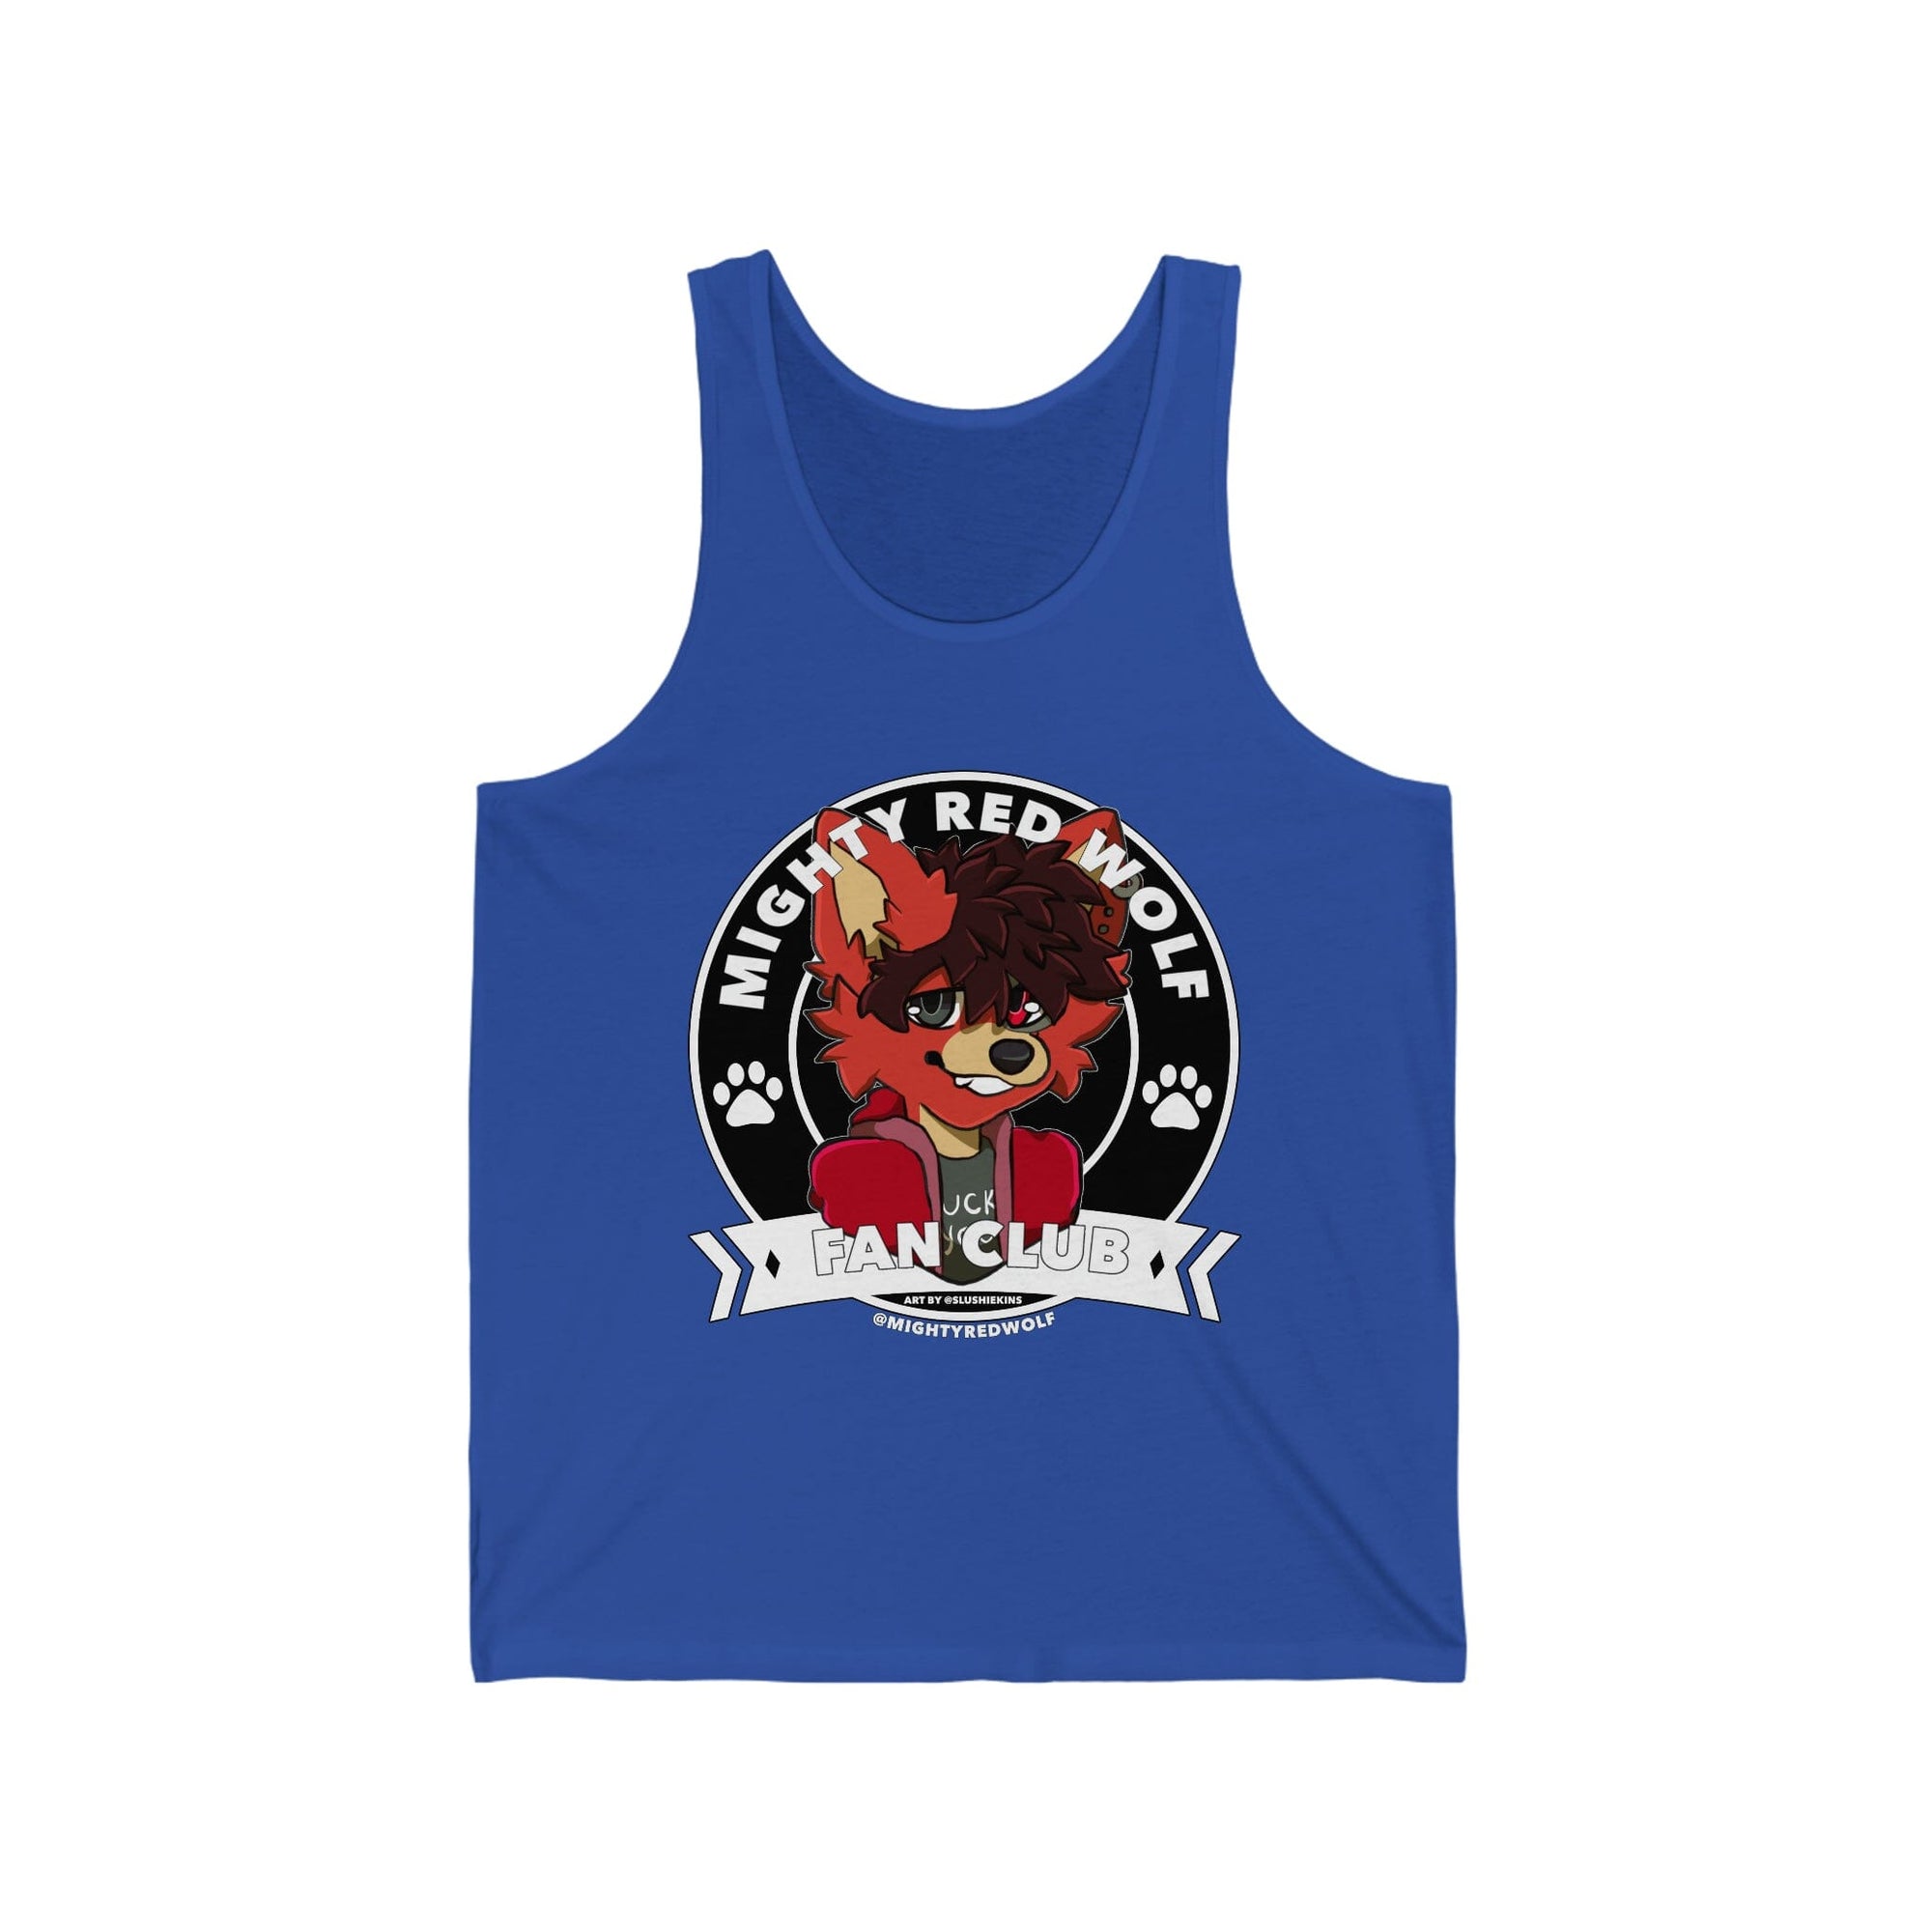 MRW Fanclub - Tank Top Tank Top AFLT-Mighty-Red Royal Blue XS 